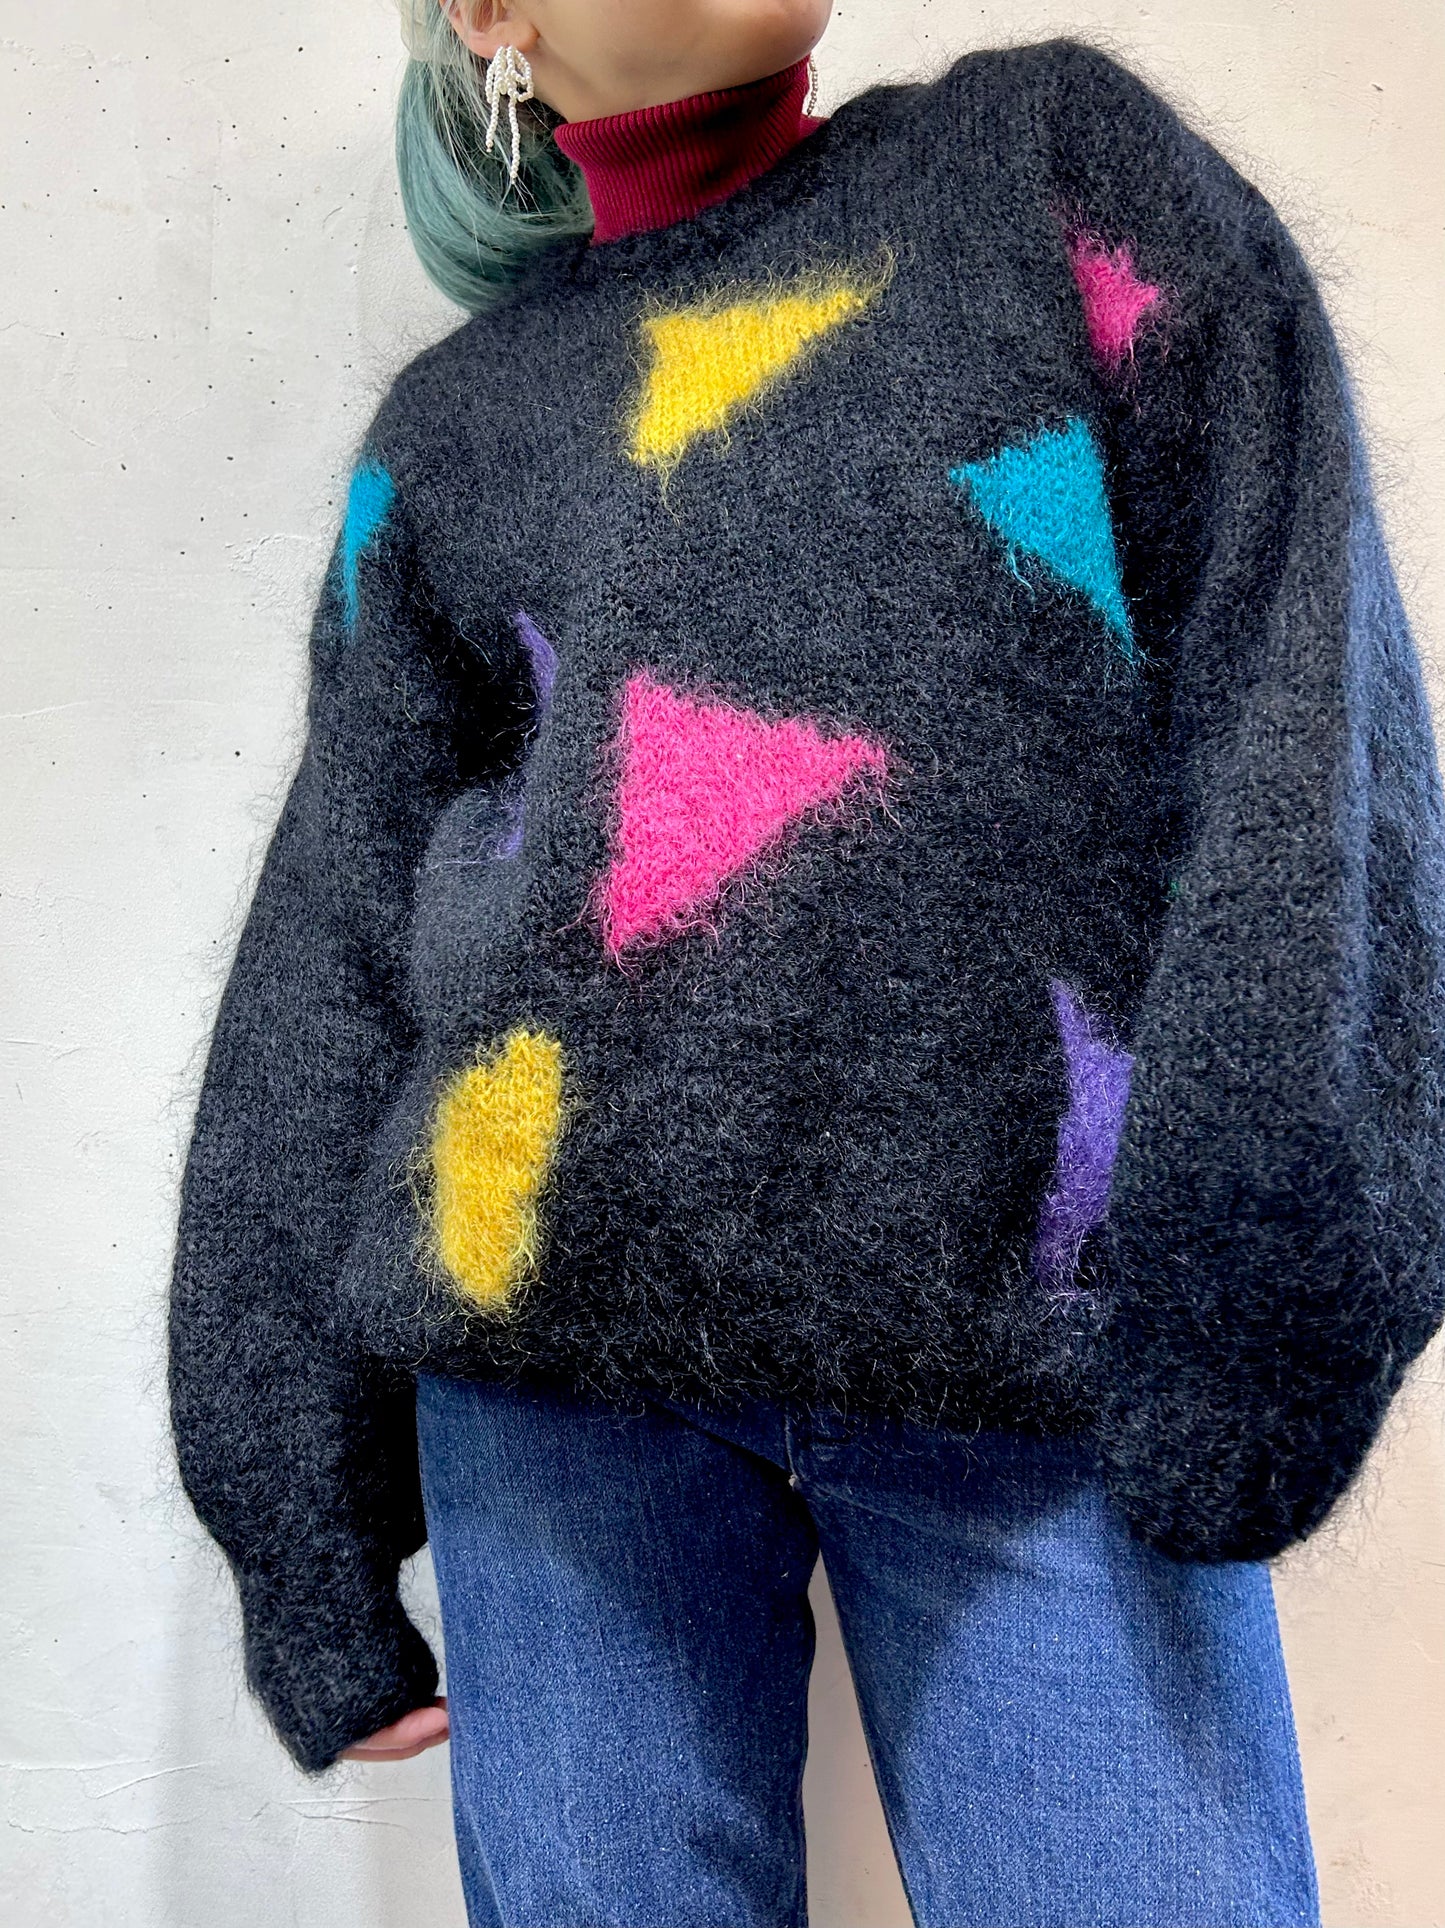 Vintage Mohair Knit Sweater MADE IN GREAT BRITAIN [L25848]